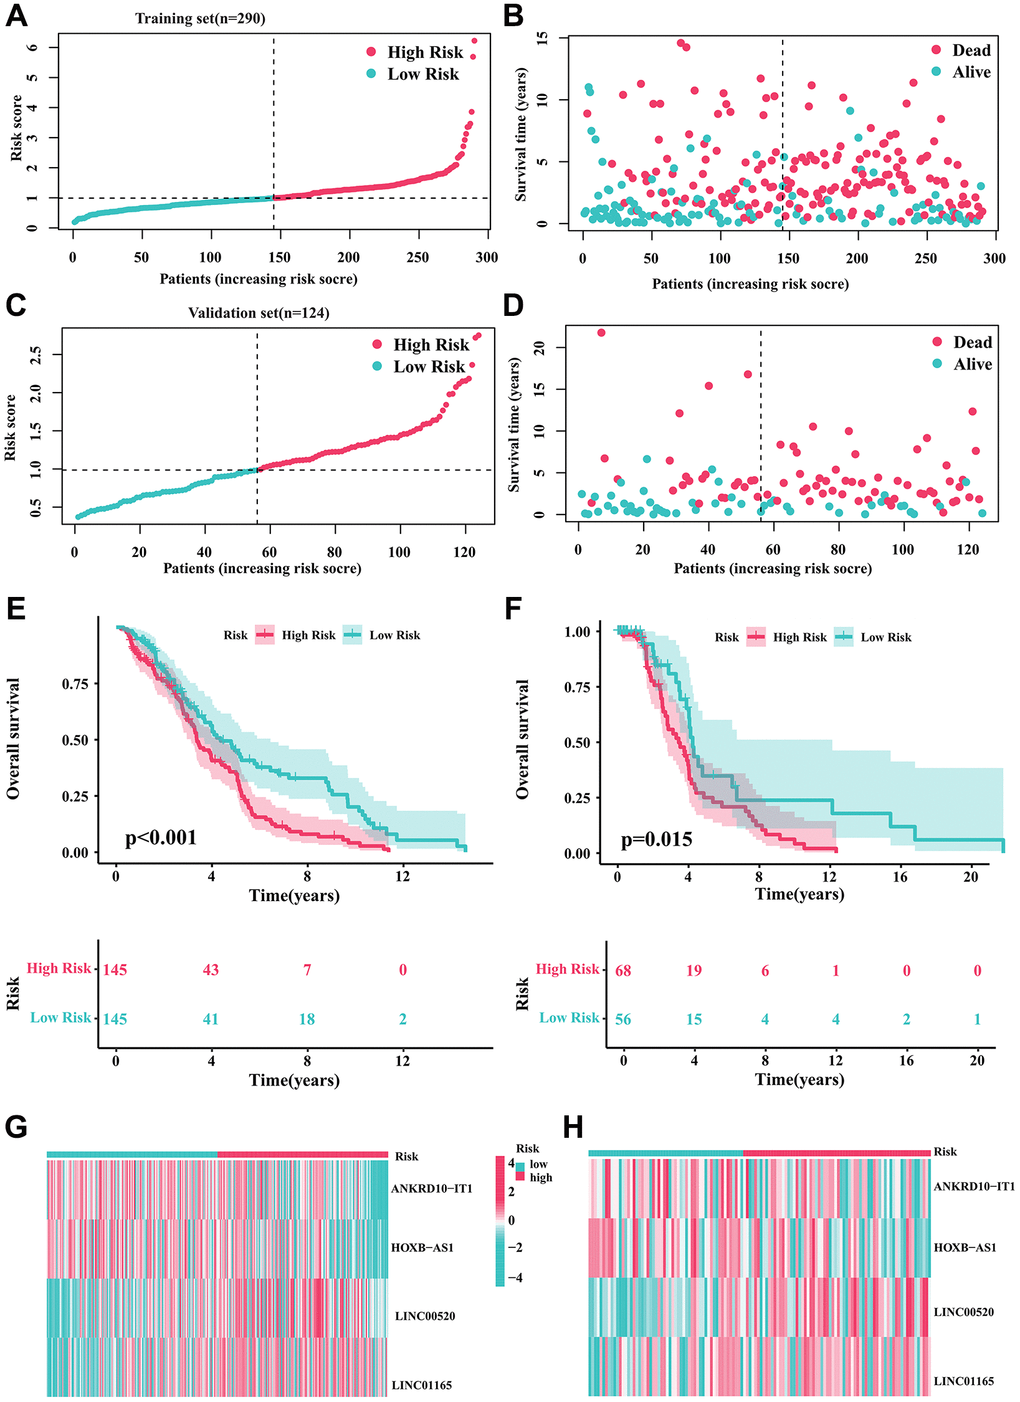 Validation of the prognostic risk signature. (A, B) Stratification of CRIRLs into risk subgroups in training cohort. (C, D) Stratification of CRIRLs into risk subgroups in validation cohort. (E, F) Analysis of clinical prognosis outcomes for risk subgroups in training cohort and validation set of CRIRLs. (G, H) Expression of the 4 prognostic CRIRLs in training cohort and validation set.